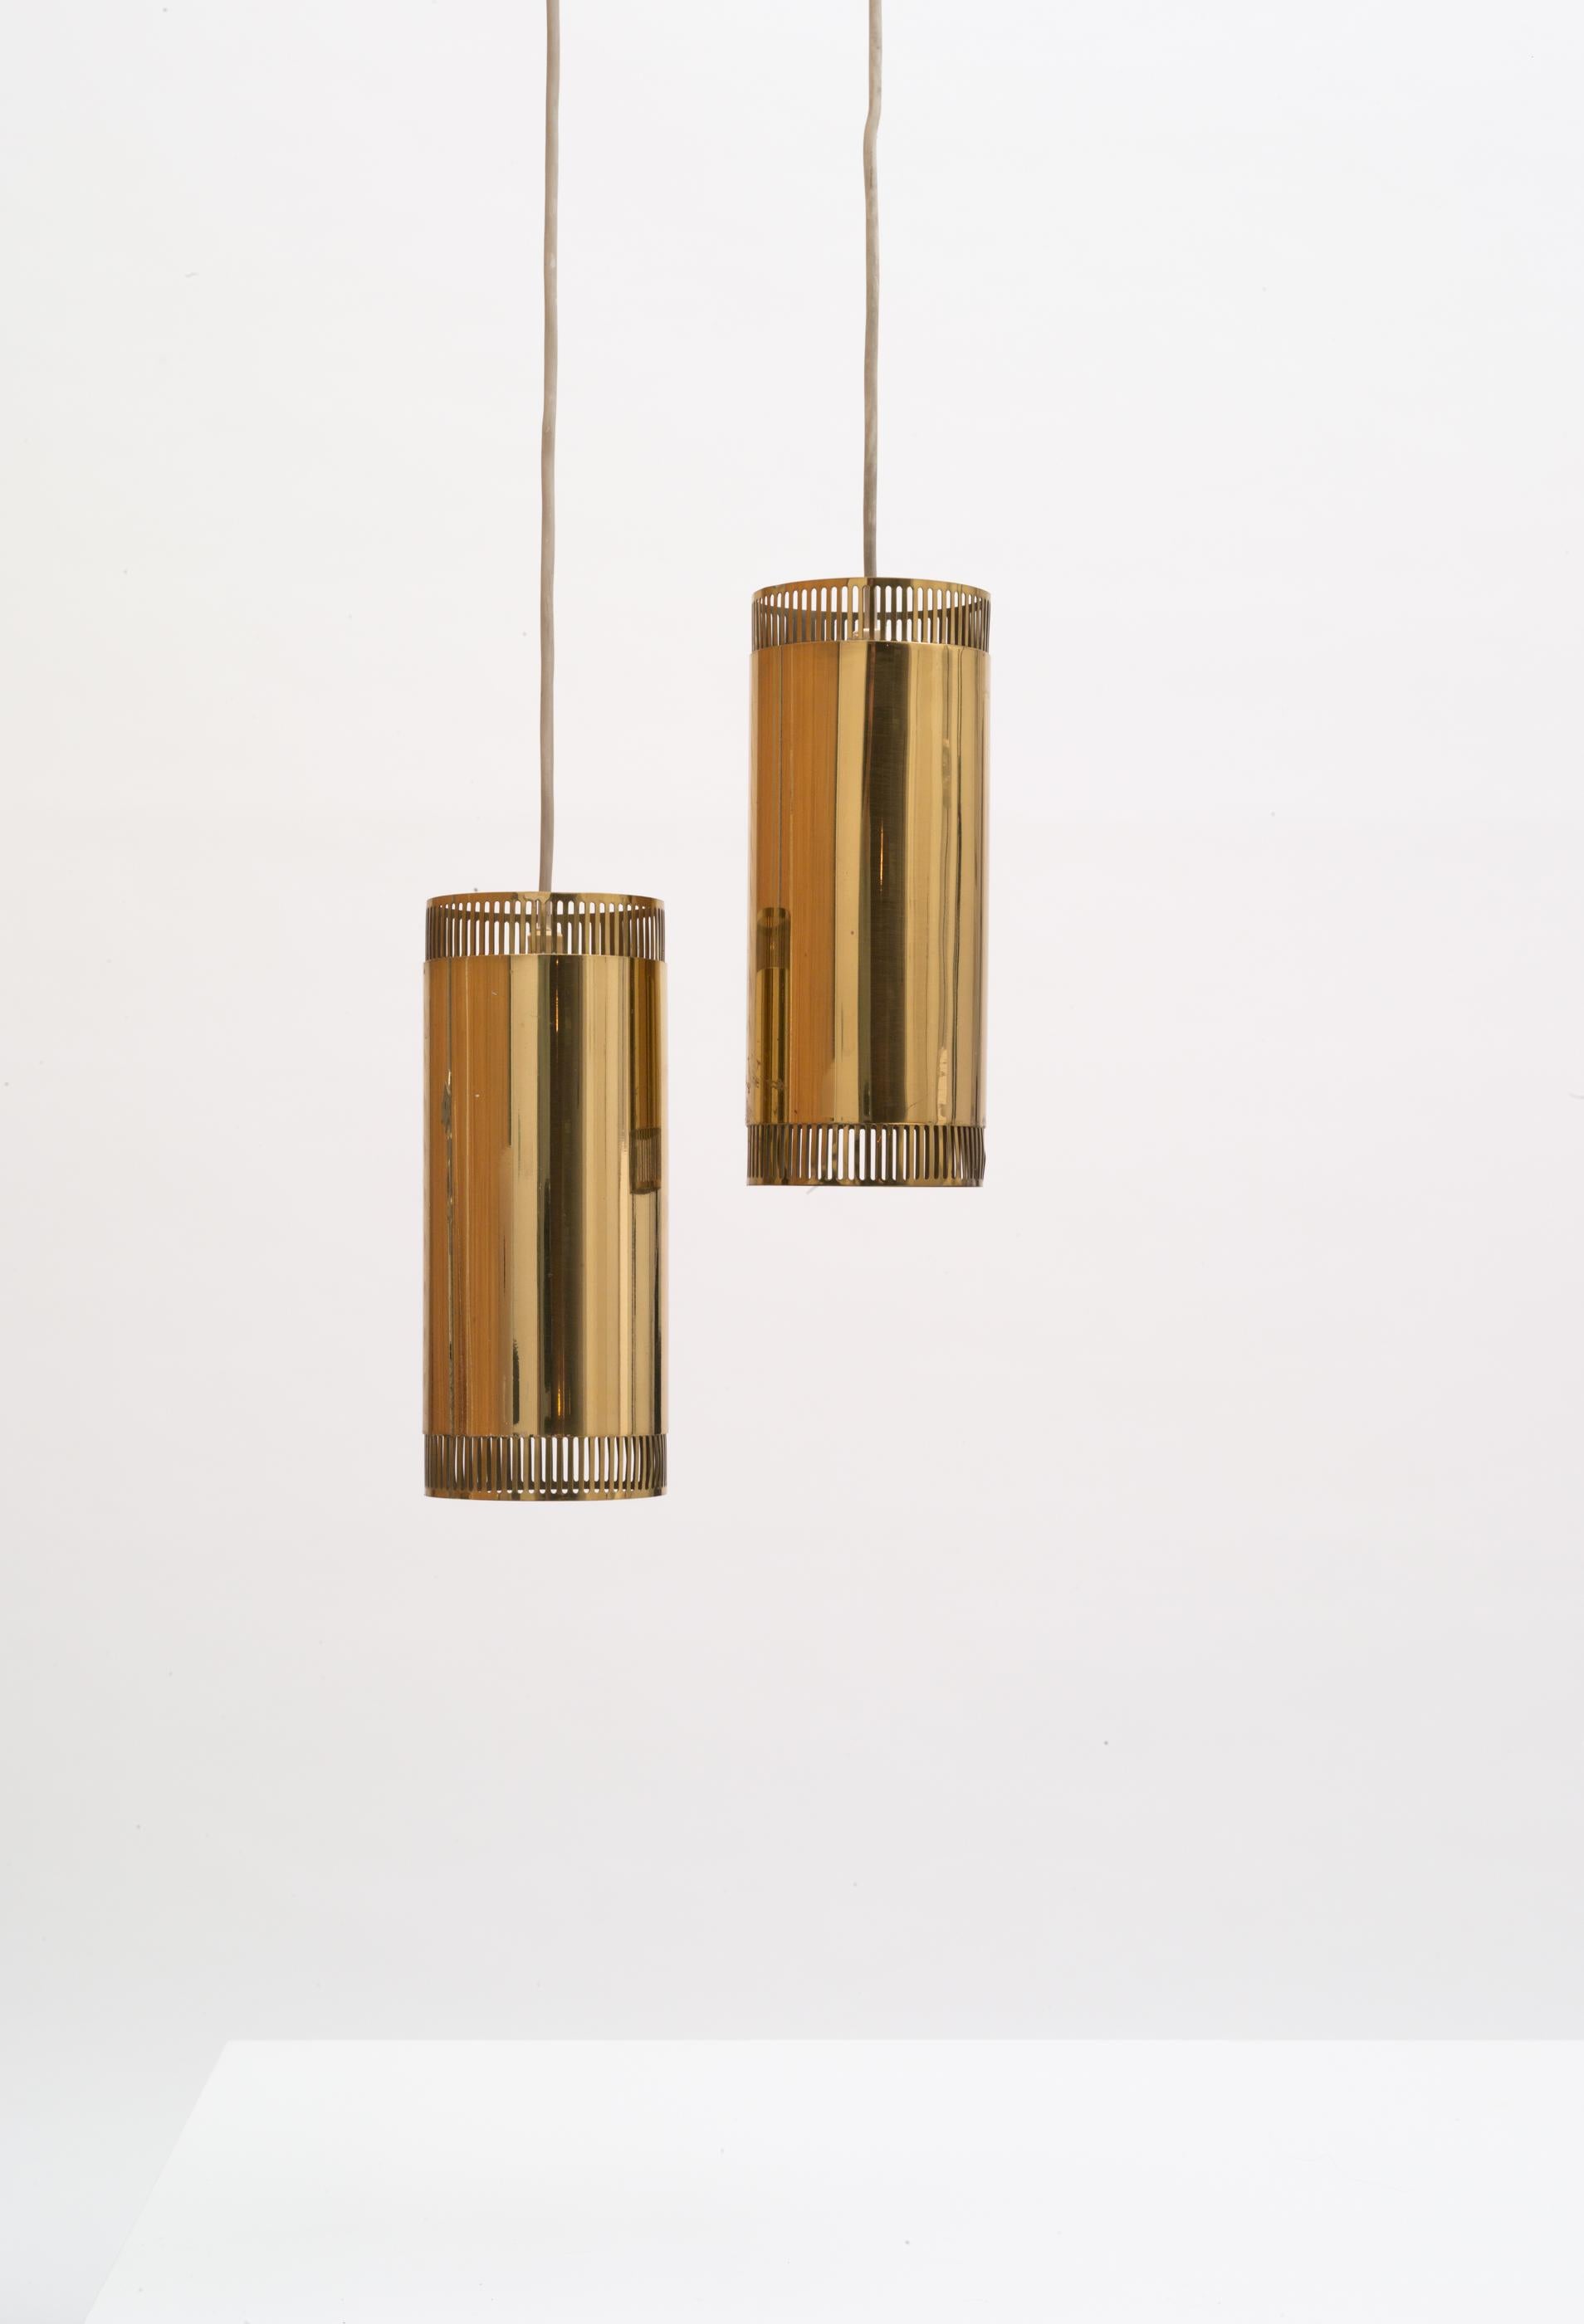 Pair of pendant lights produced by Boréns (1924-1985), Borås, Sweden, 1950s. Made out of solid brass.